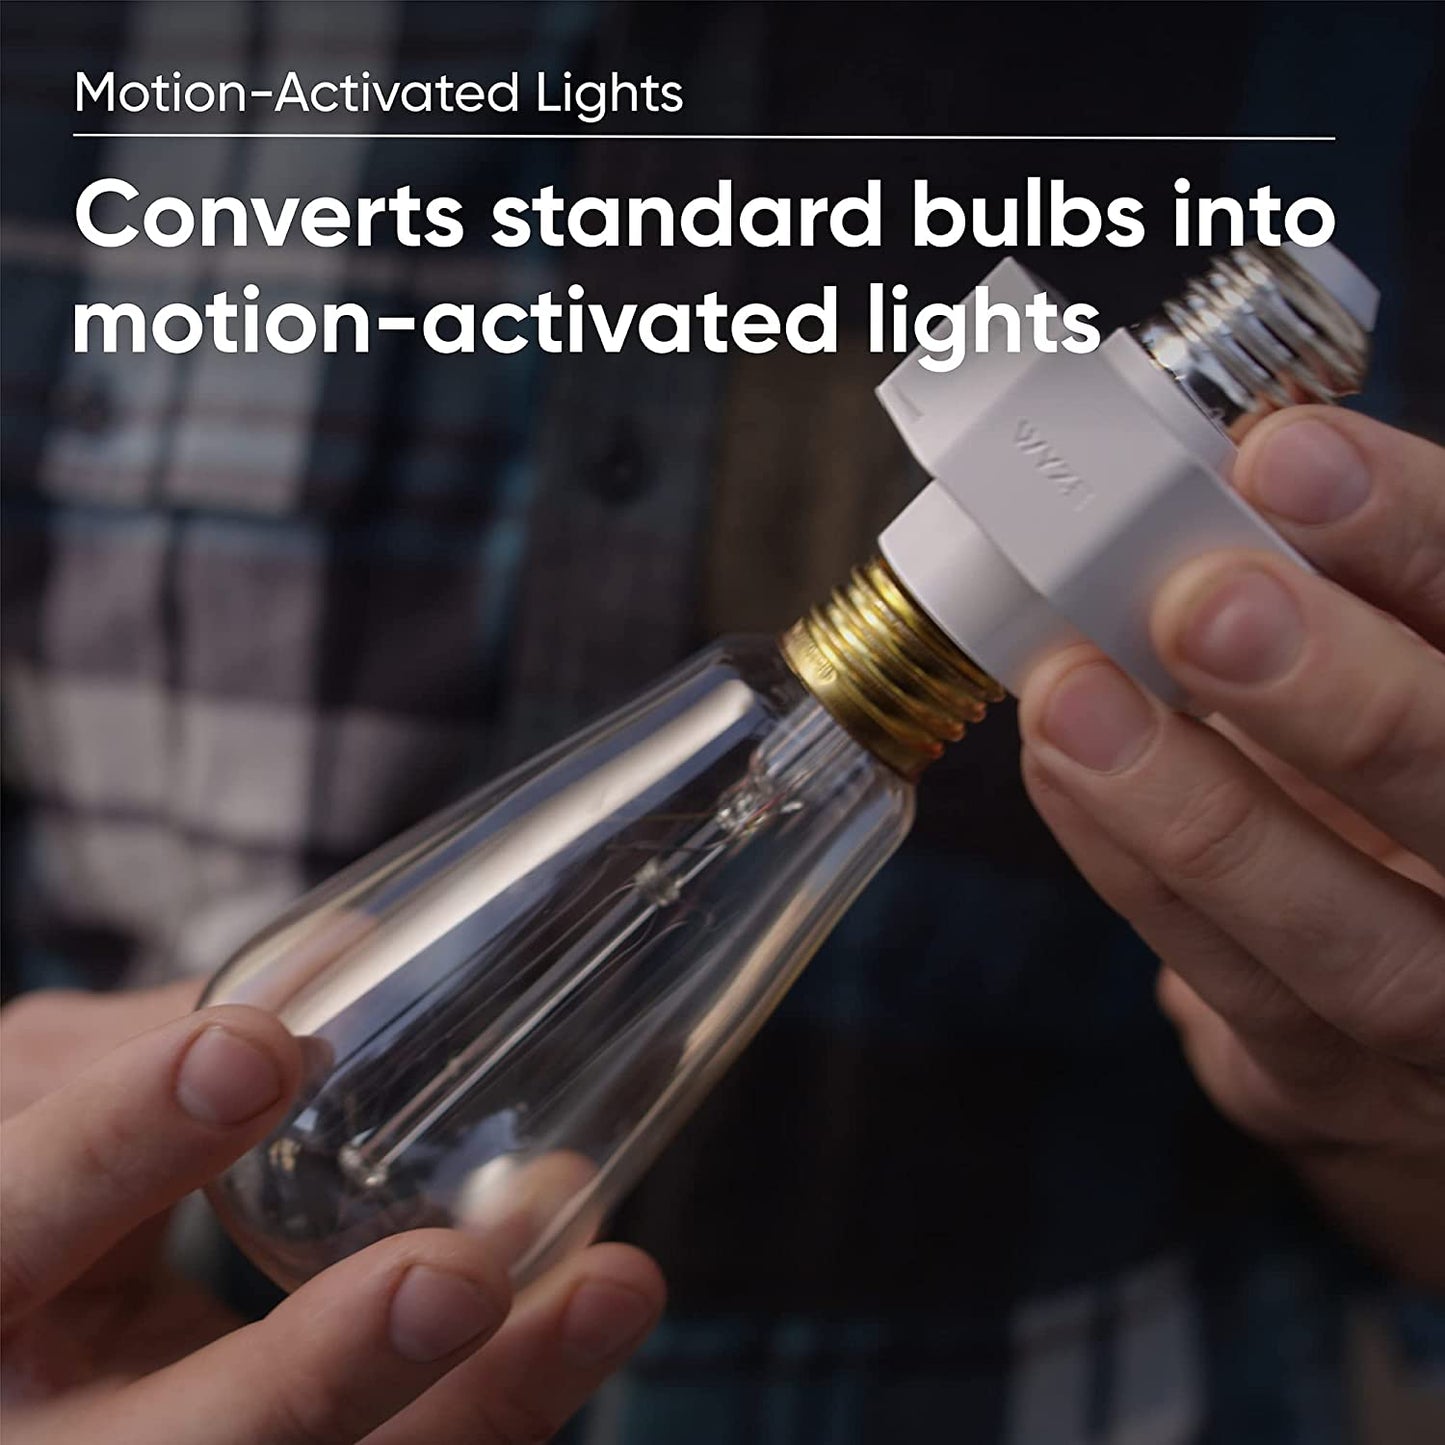 Person holding a Wyze Lamp Socket that is attached to an edison bulb. Text overlay that says "Converts standard bulbs into motion-activated lights."